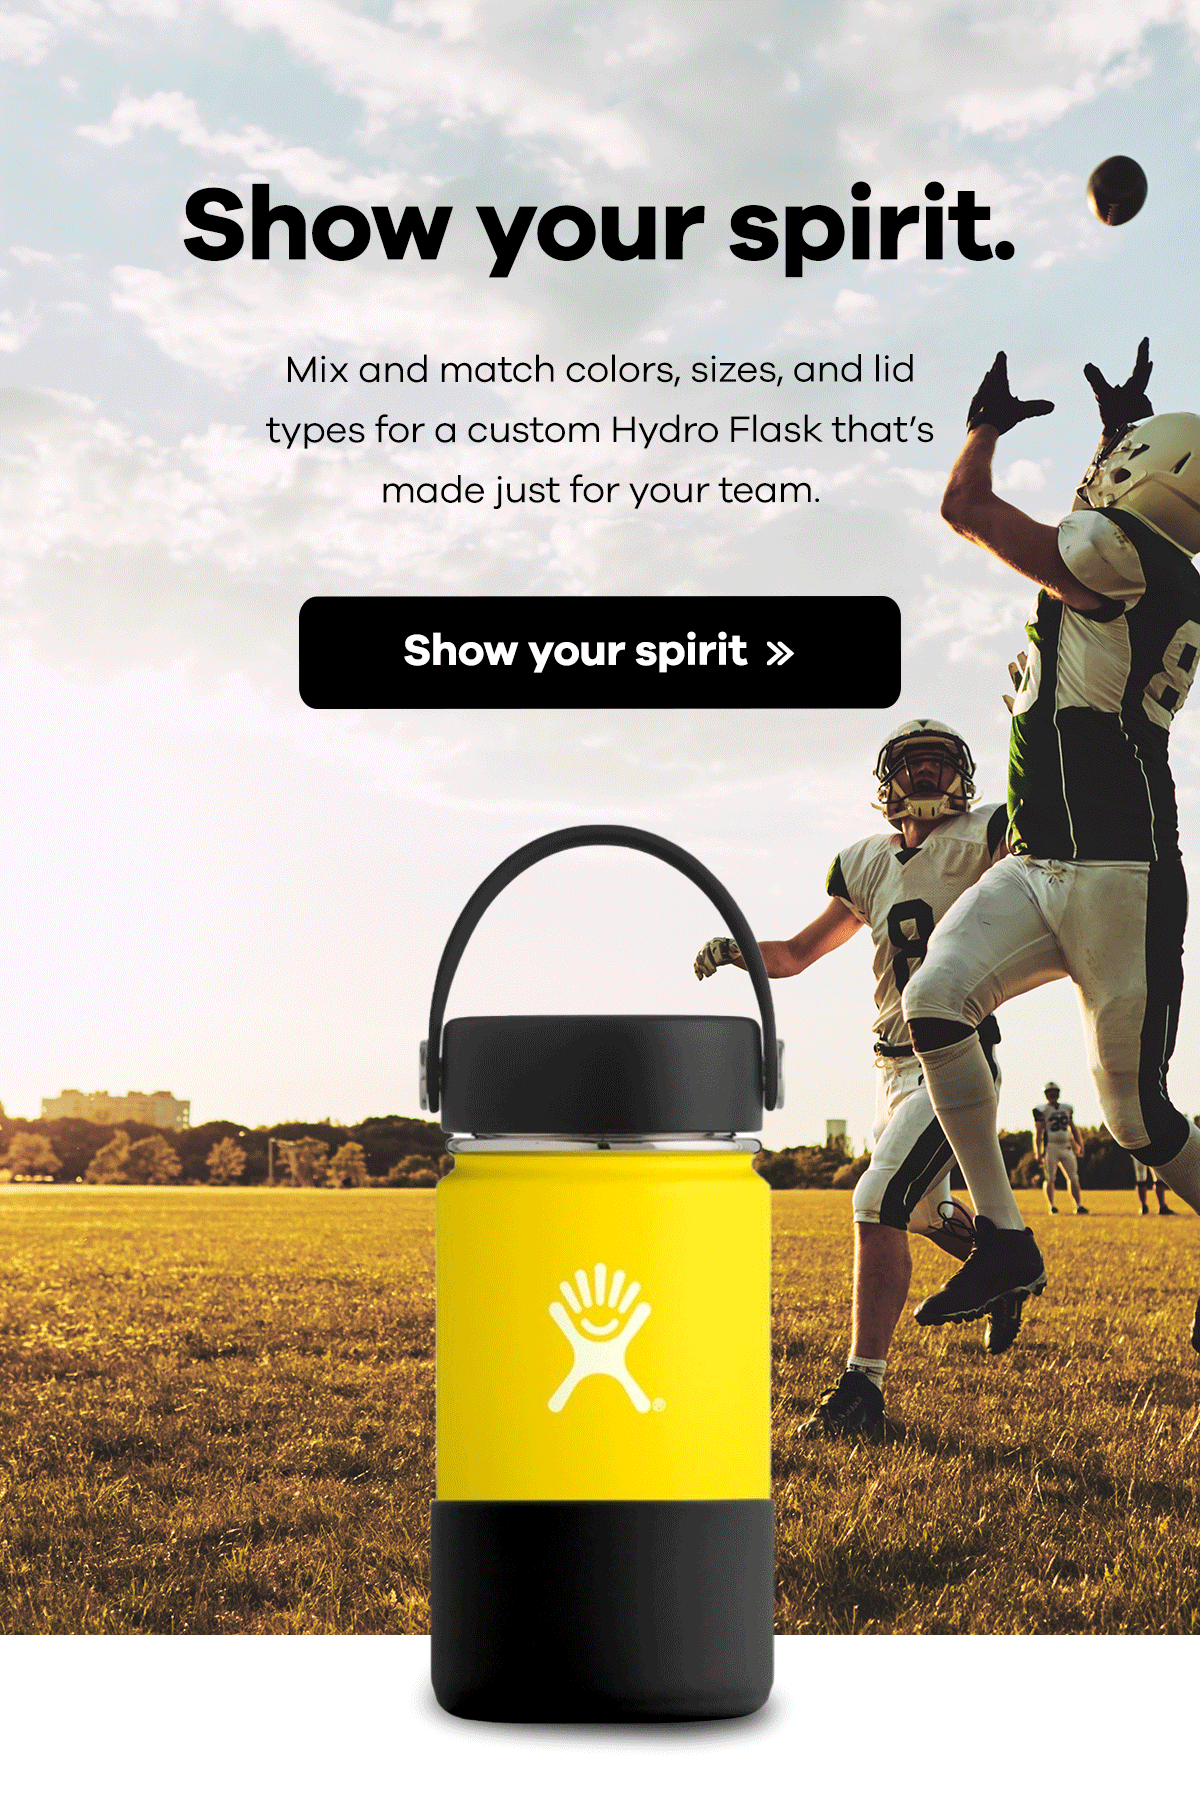 Show your spirit. Mix and match colors, sizes, and lid types for a custom Hydro Flask that's made just for your team. | Show your spirit >>